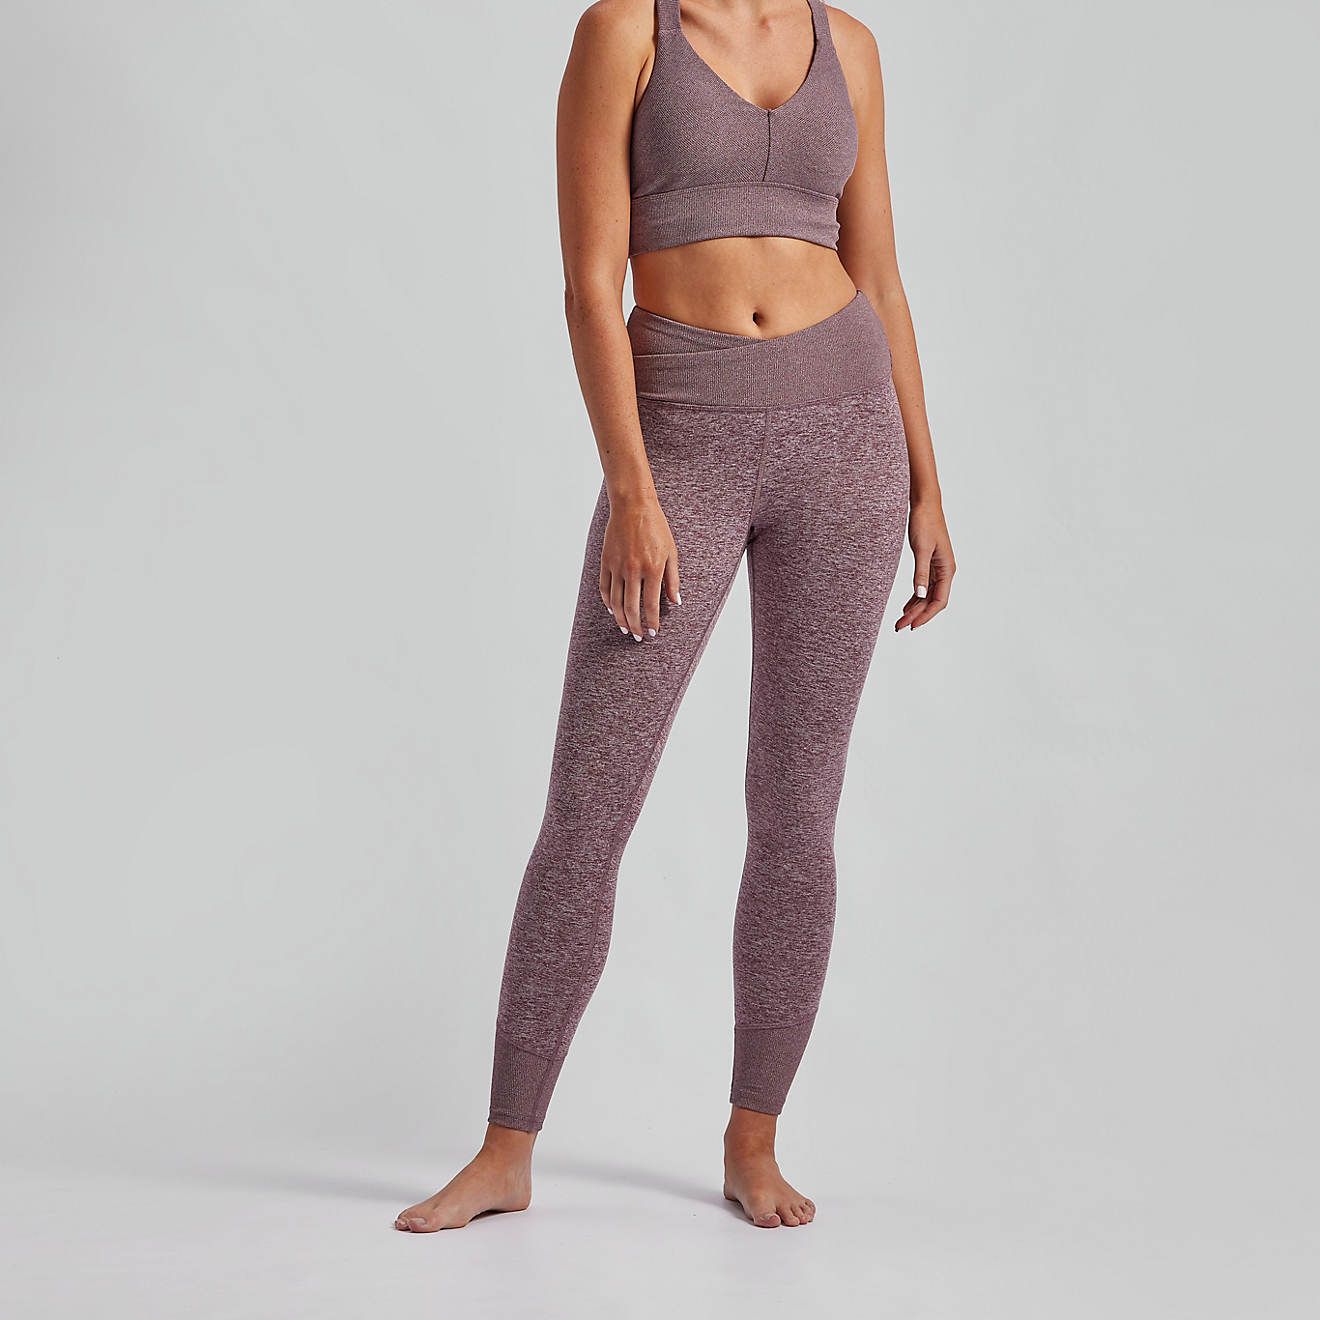 Freely Women's Laurita Ribbed Leggings | Academy | Academy Sports + Outdoors